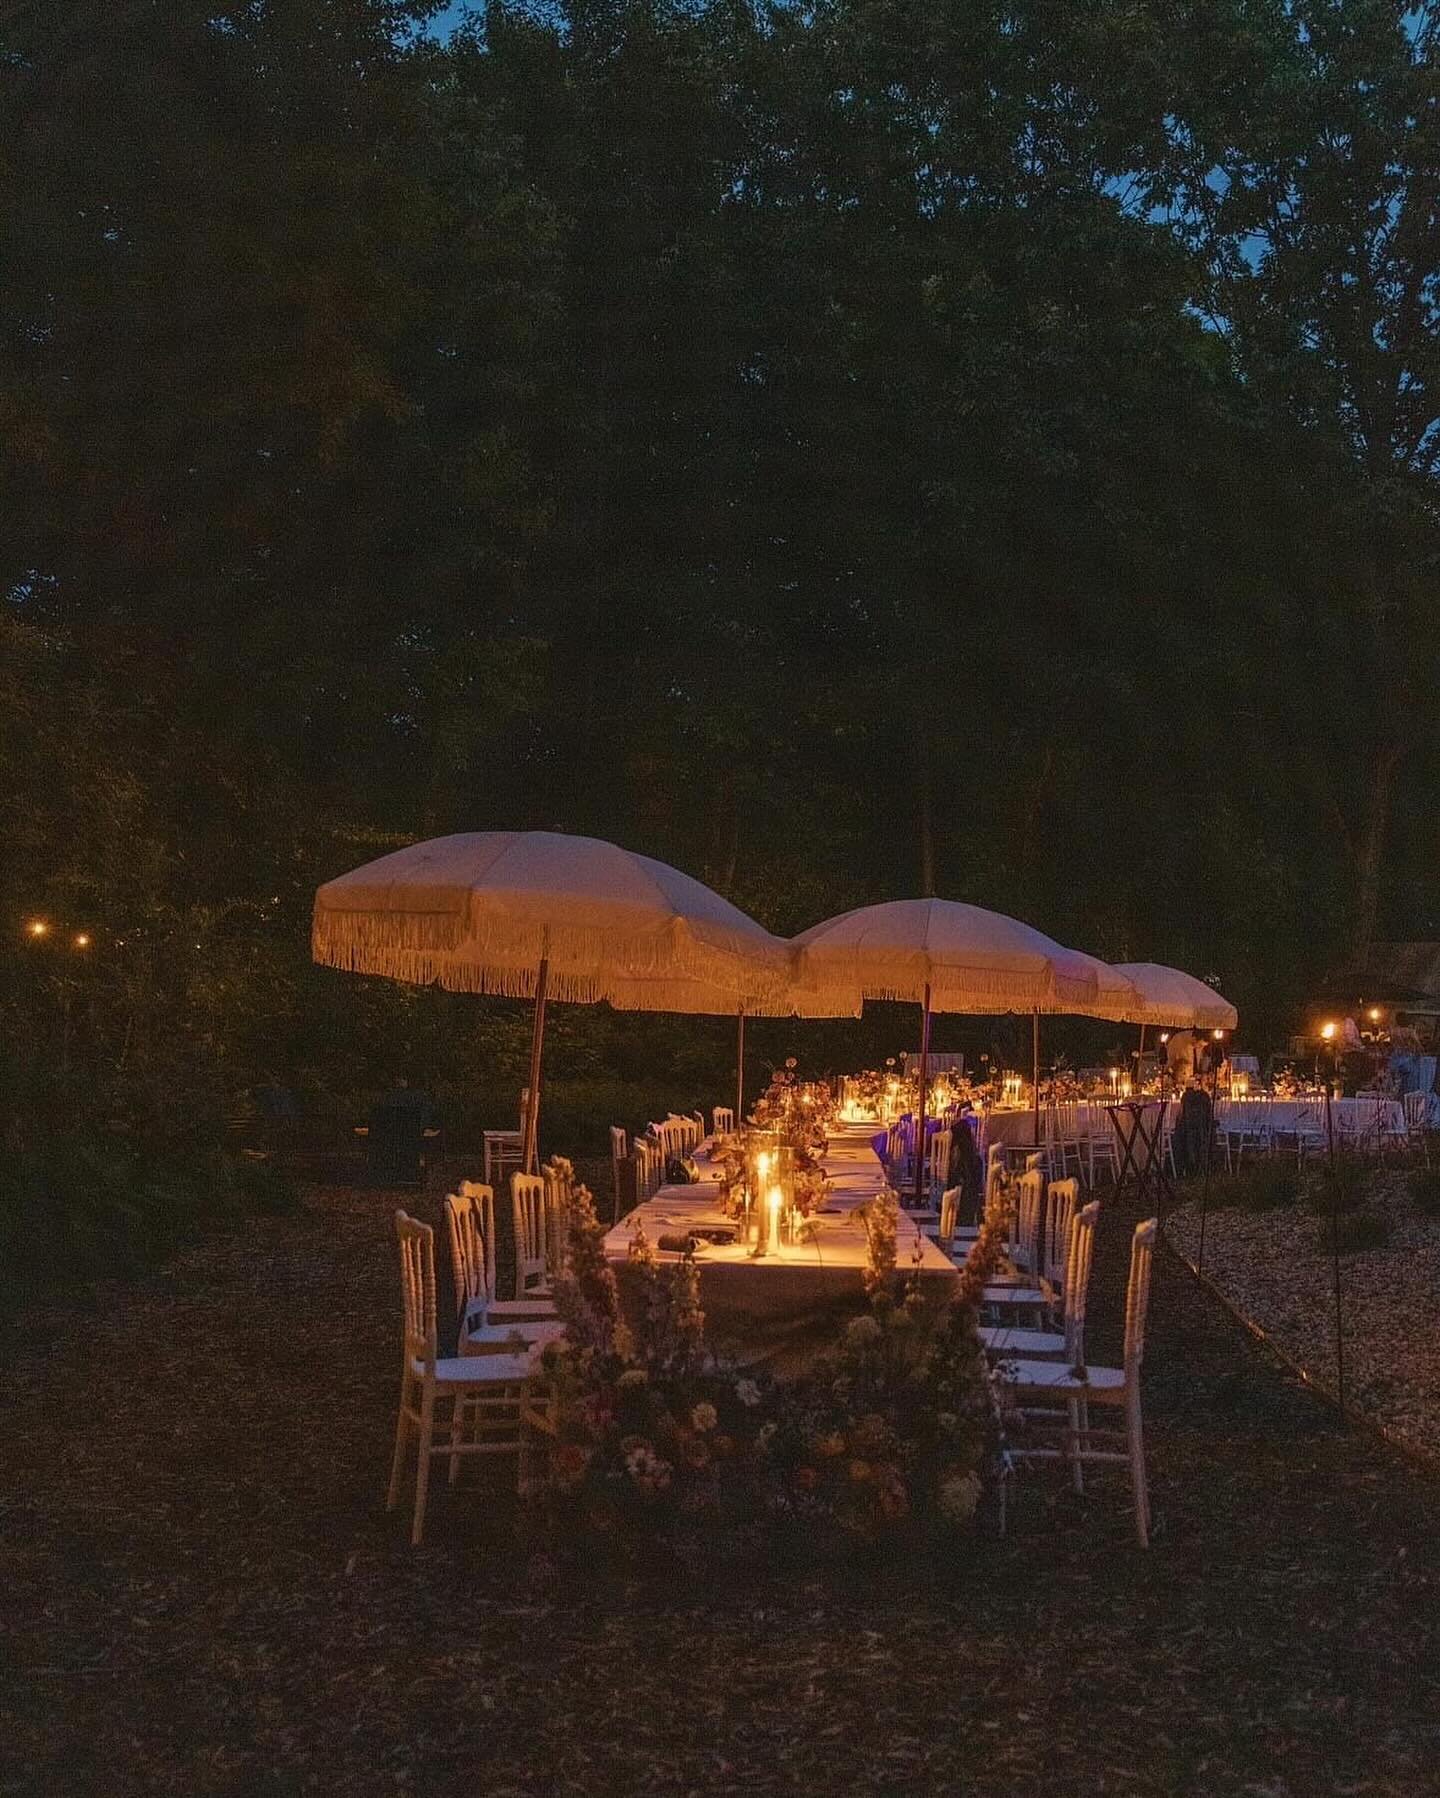 Well this buried photo just surfaced today! Thanks to @cass_and_jeanflowerco for posting it so I could steal it!

Take a Peek into the most perfect summer wedding executed by this dream team:

Dream Bride @oldsalex 
Photography: @shanstclair 
Venue: 